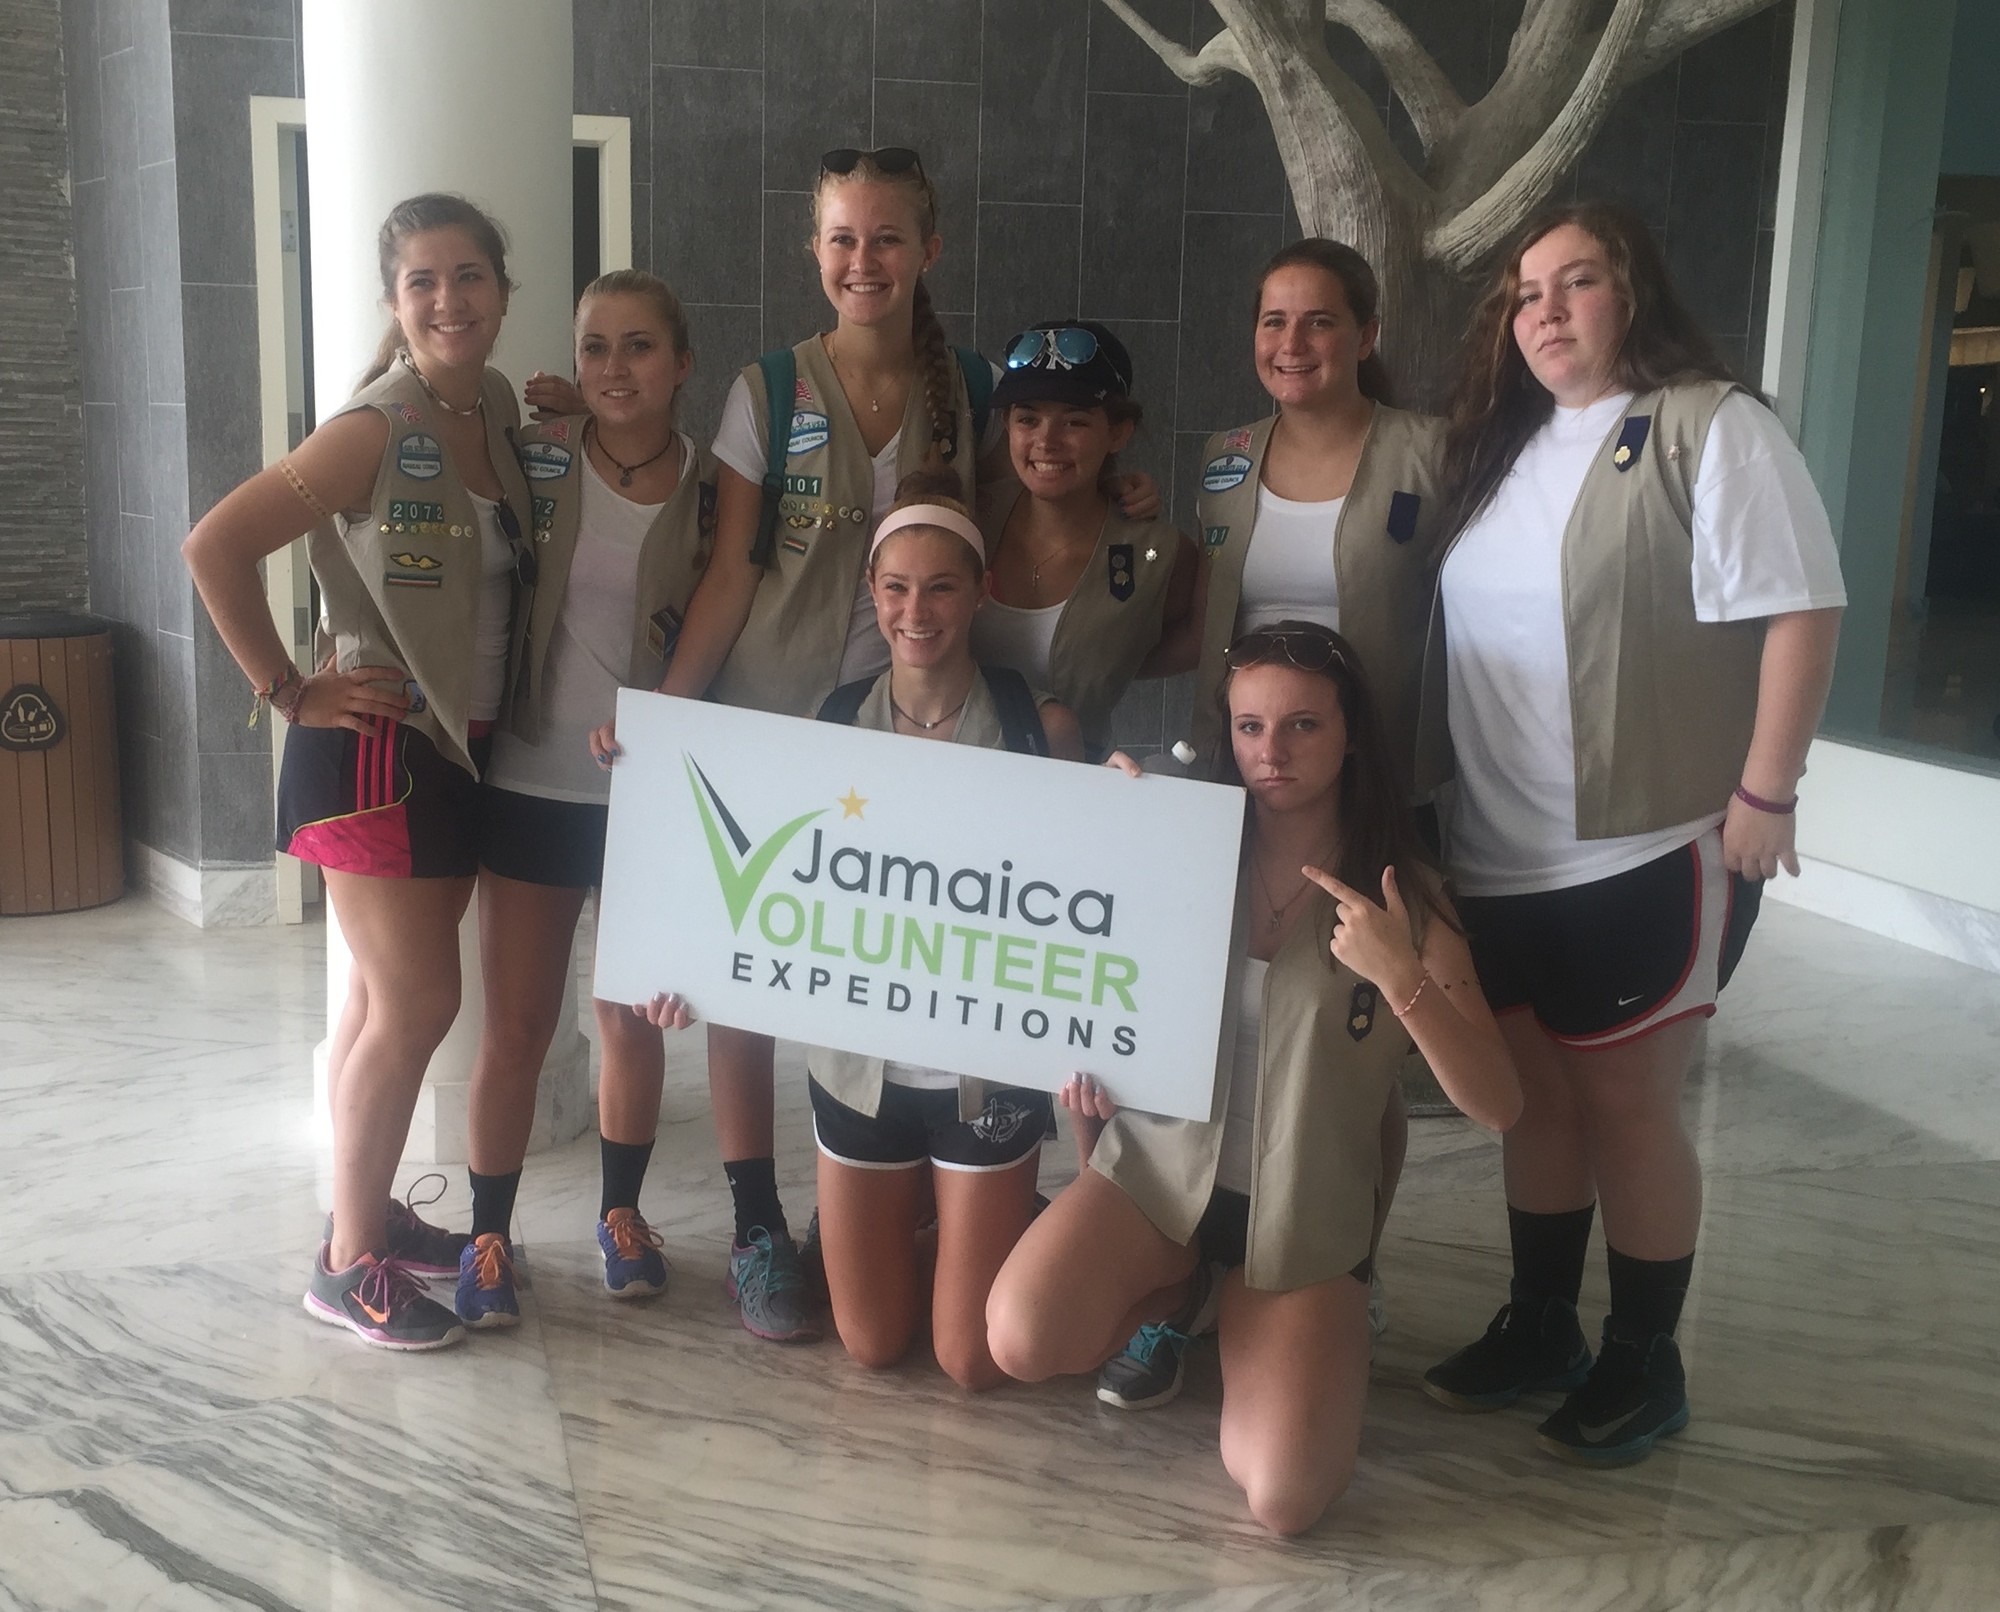 The Girl Scouts after their arrival in Jamaica: Standing from left were Rachael Putelo, Nora Louw, Sarah Jaskowiak, Joanna Ambrosio, Jessica Loyer and Kim McGeary; kneeling were Kiersten Cote, left, and Kiera Popp.